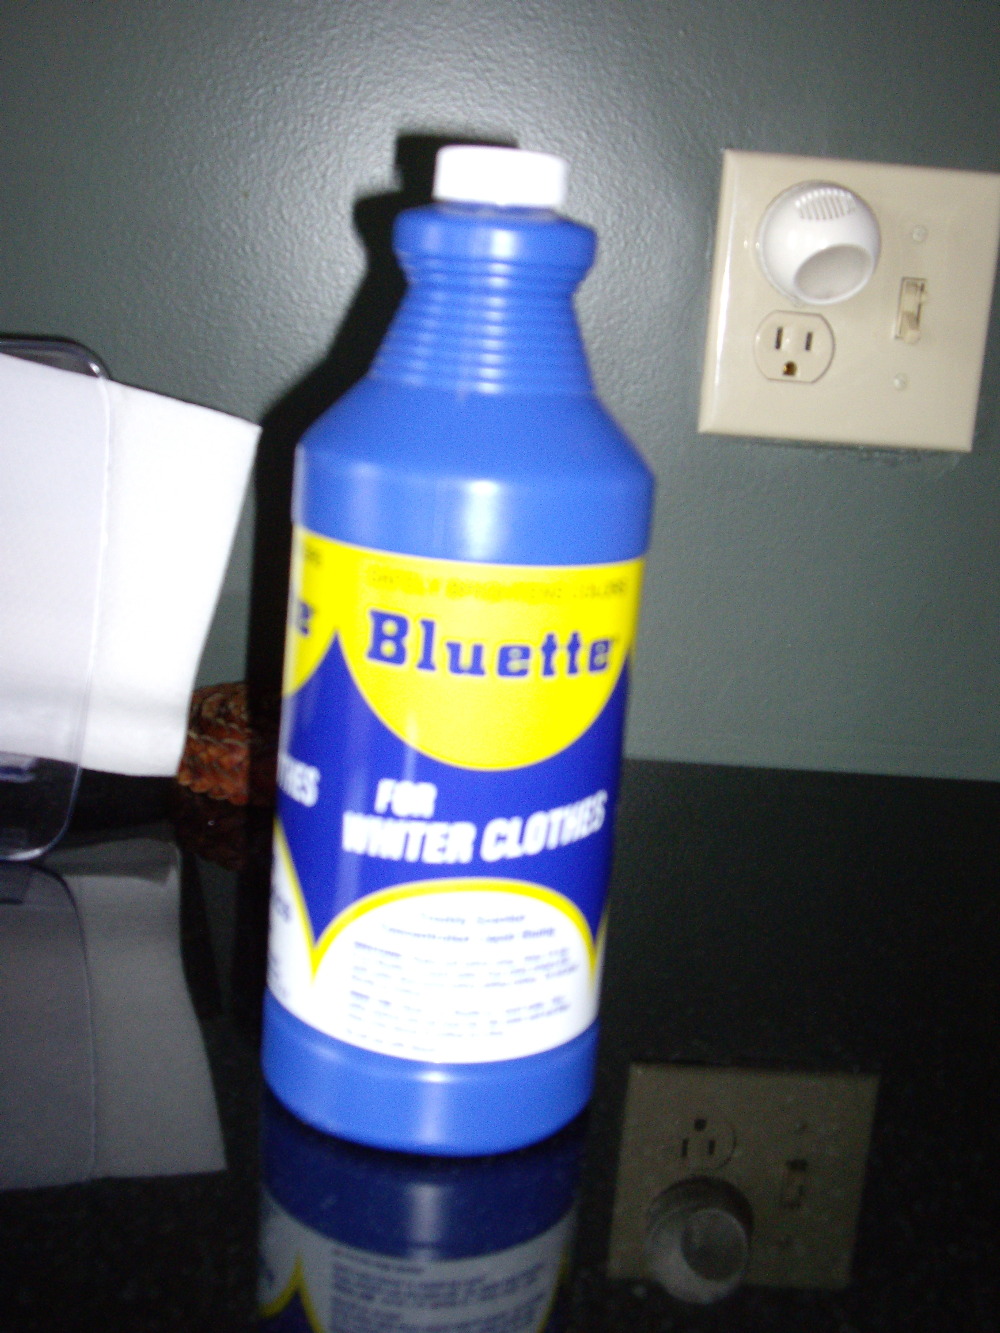 Bluette Concentrated Liquid Laundry Bluing / Laundry Detergent